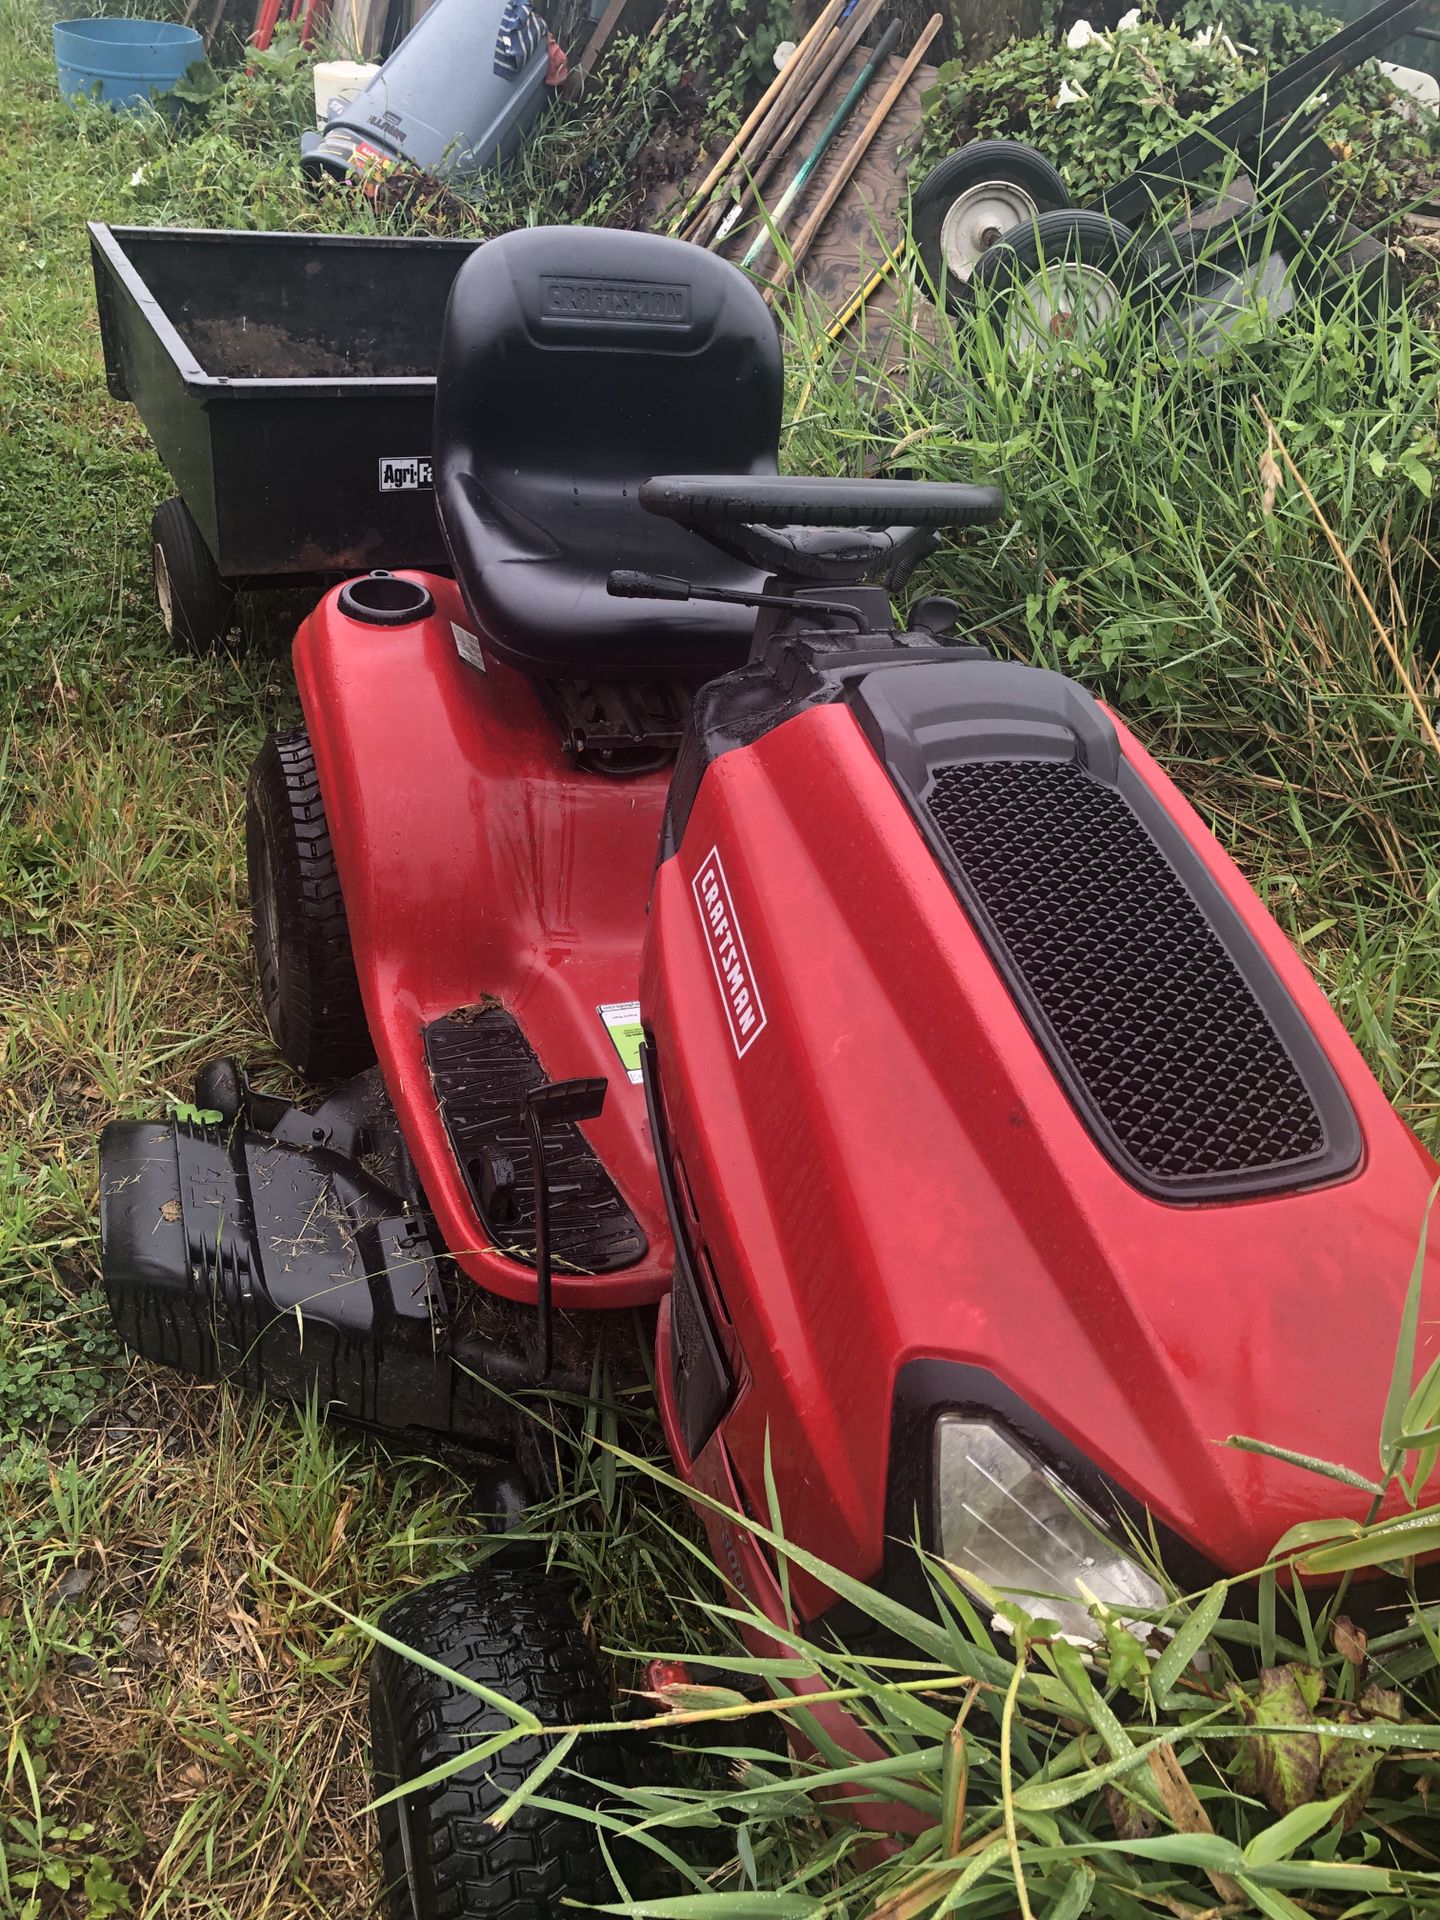 Craftsman riding mower and trailer